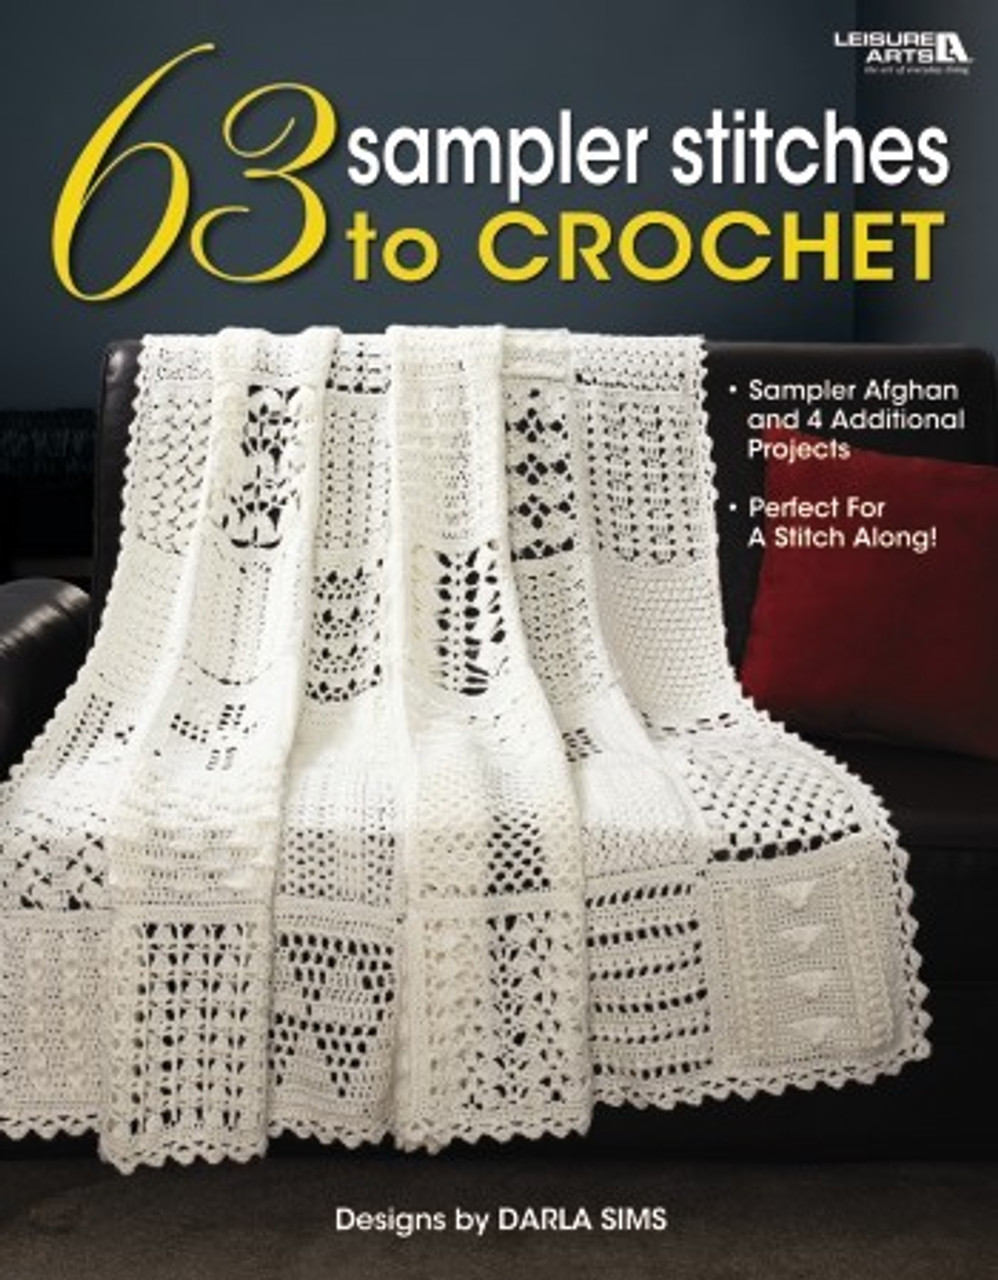 63 Easy-To-Crochet Pattern Stitches Combine to Make an Heirloom Afghan [Book]